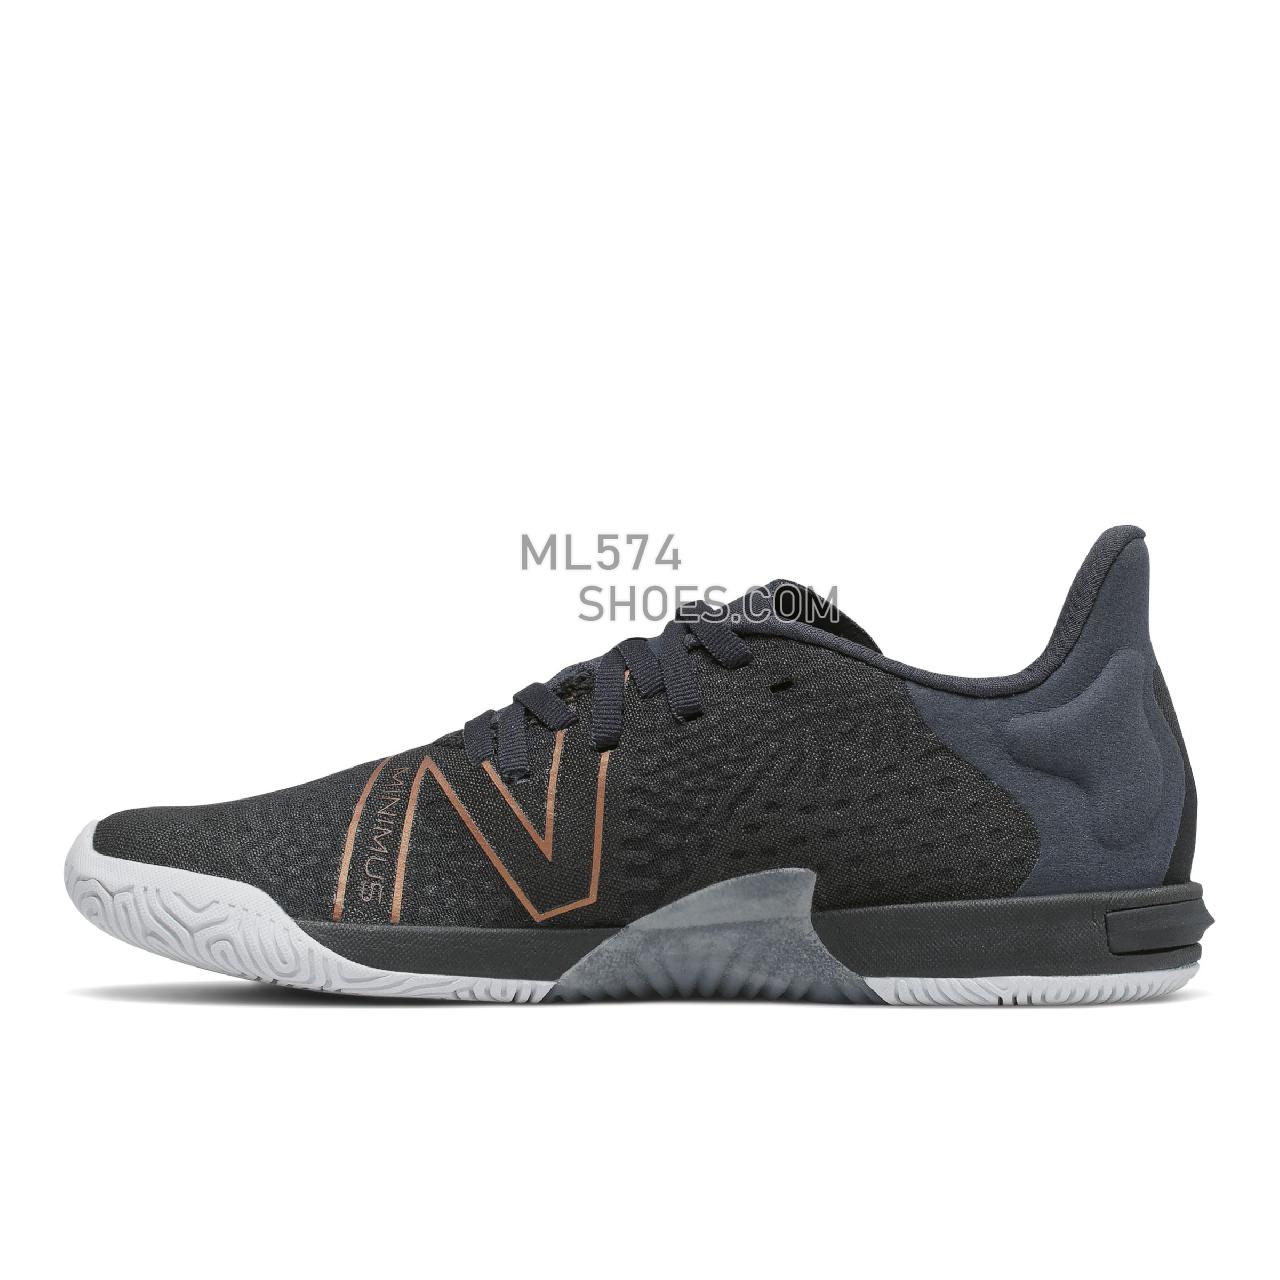 New Balance Minimus TR - Women's Workout - Black with Outerspace and Copper Metallic - WXMTRLK1